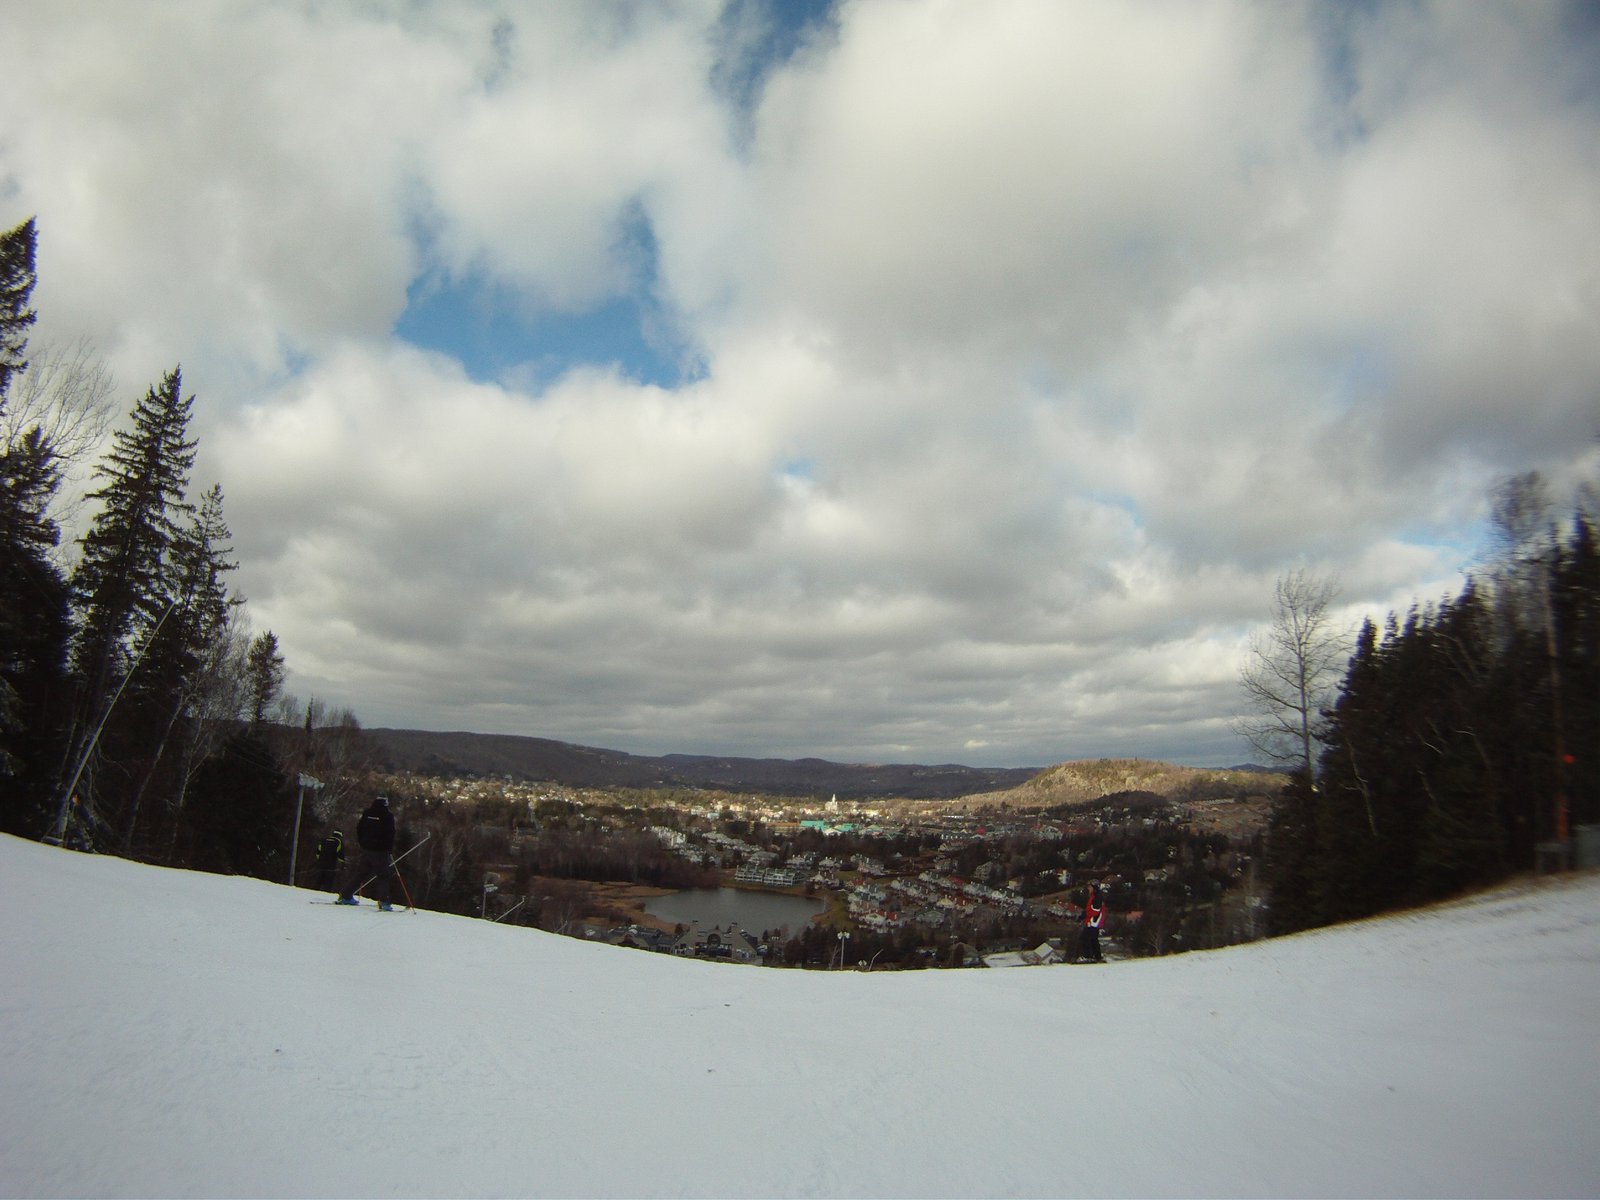 St-sauveur opening day